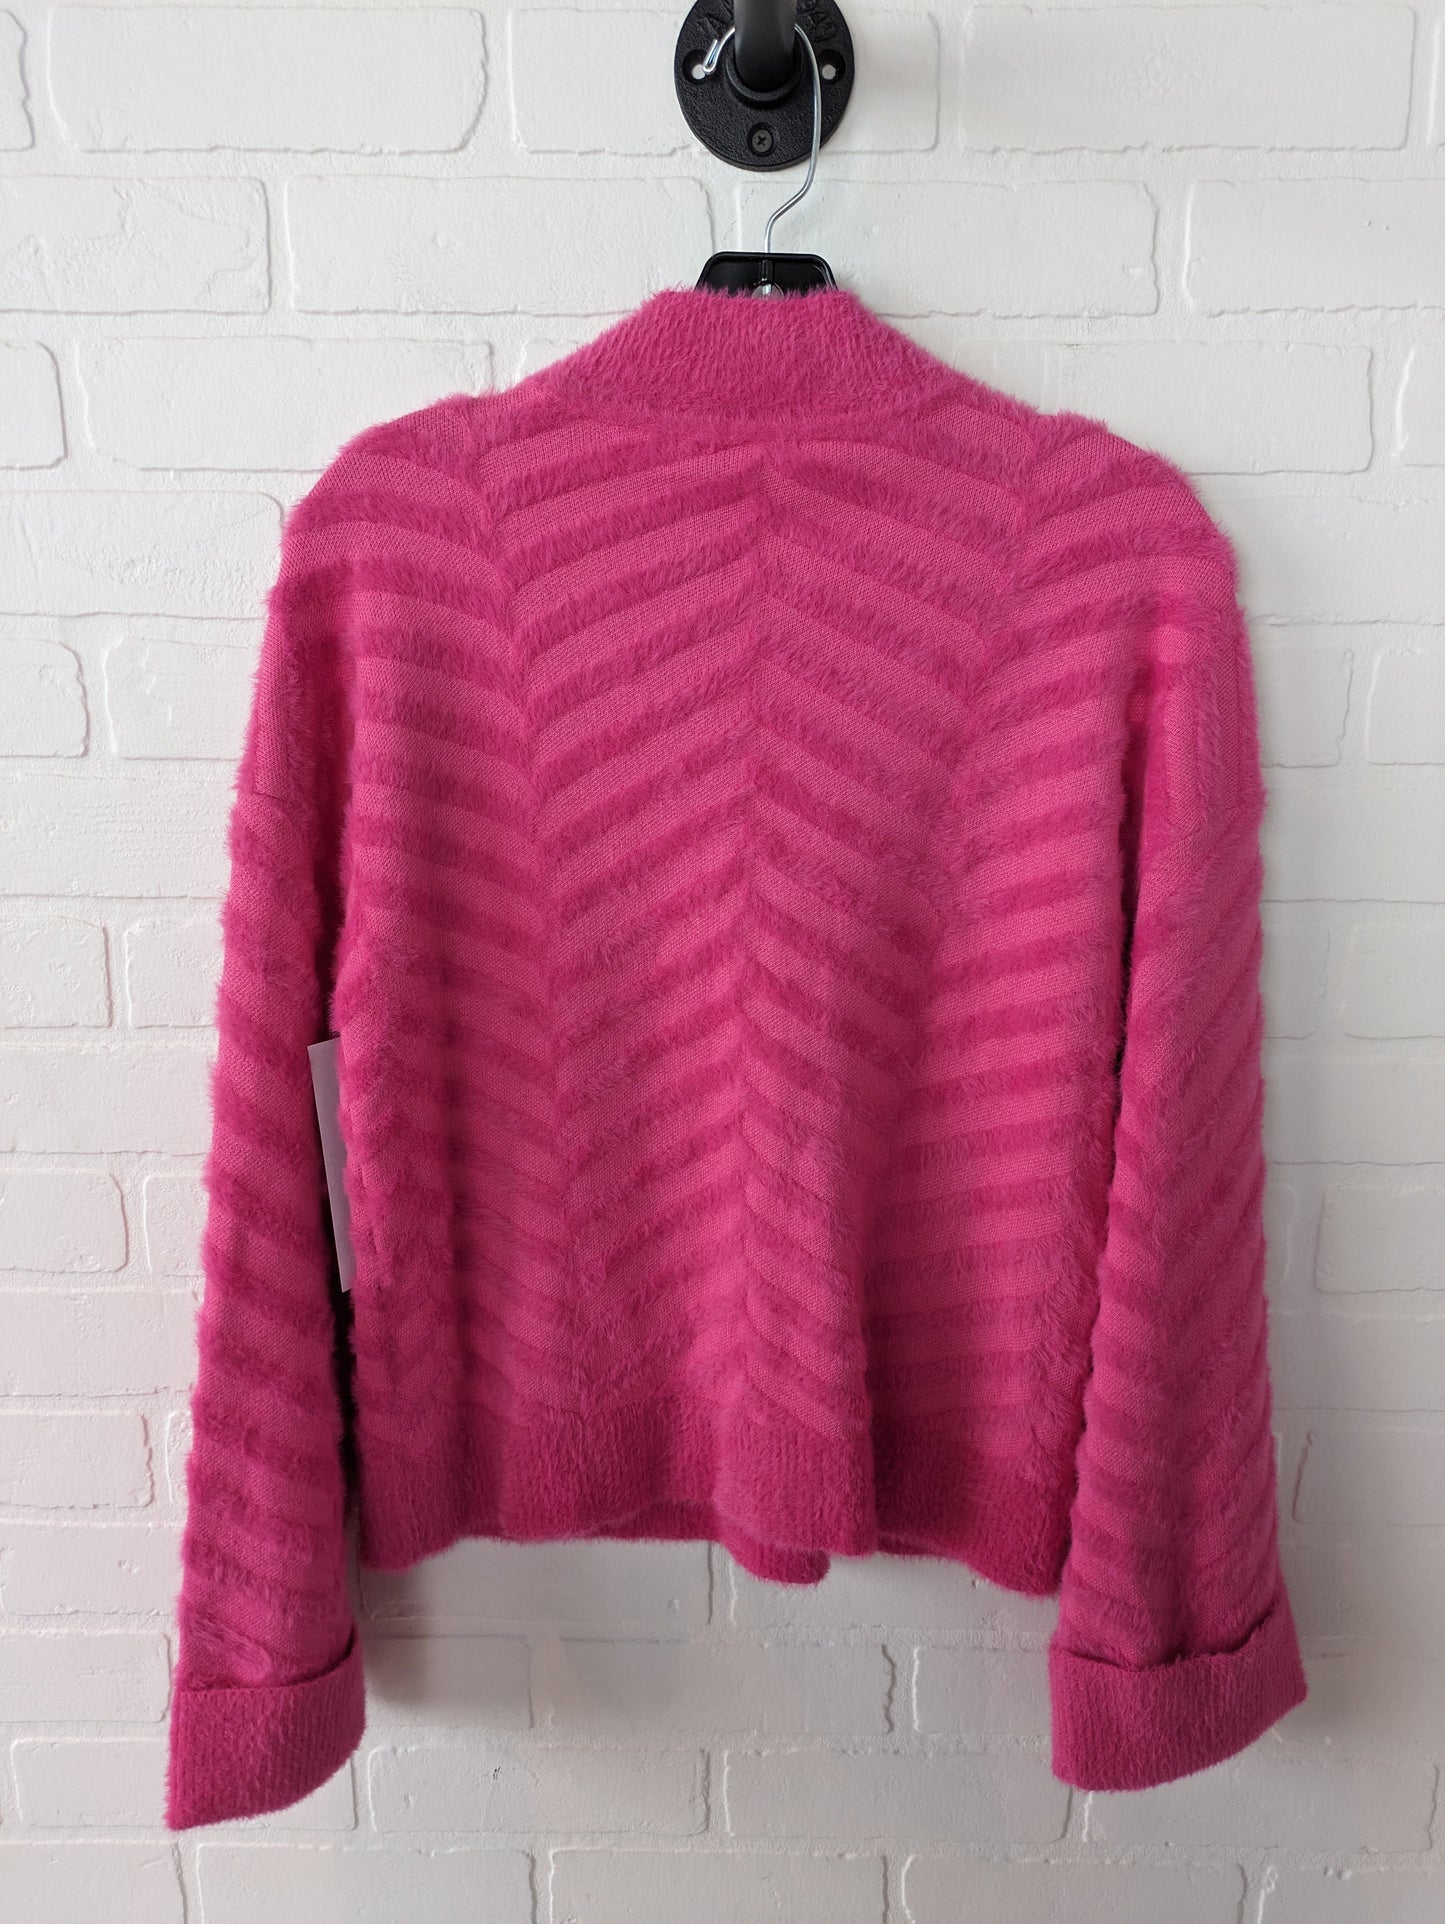 Sweater By Belldini  Size: M